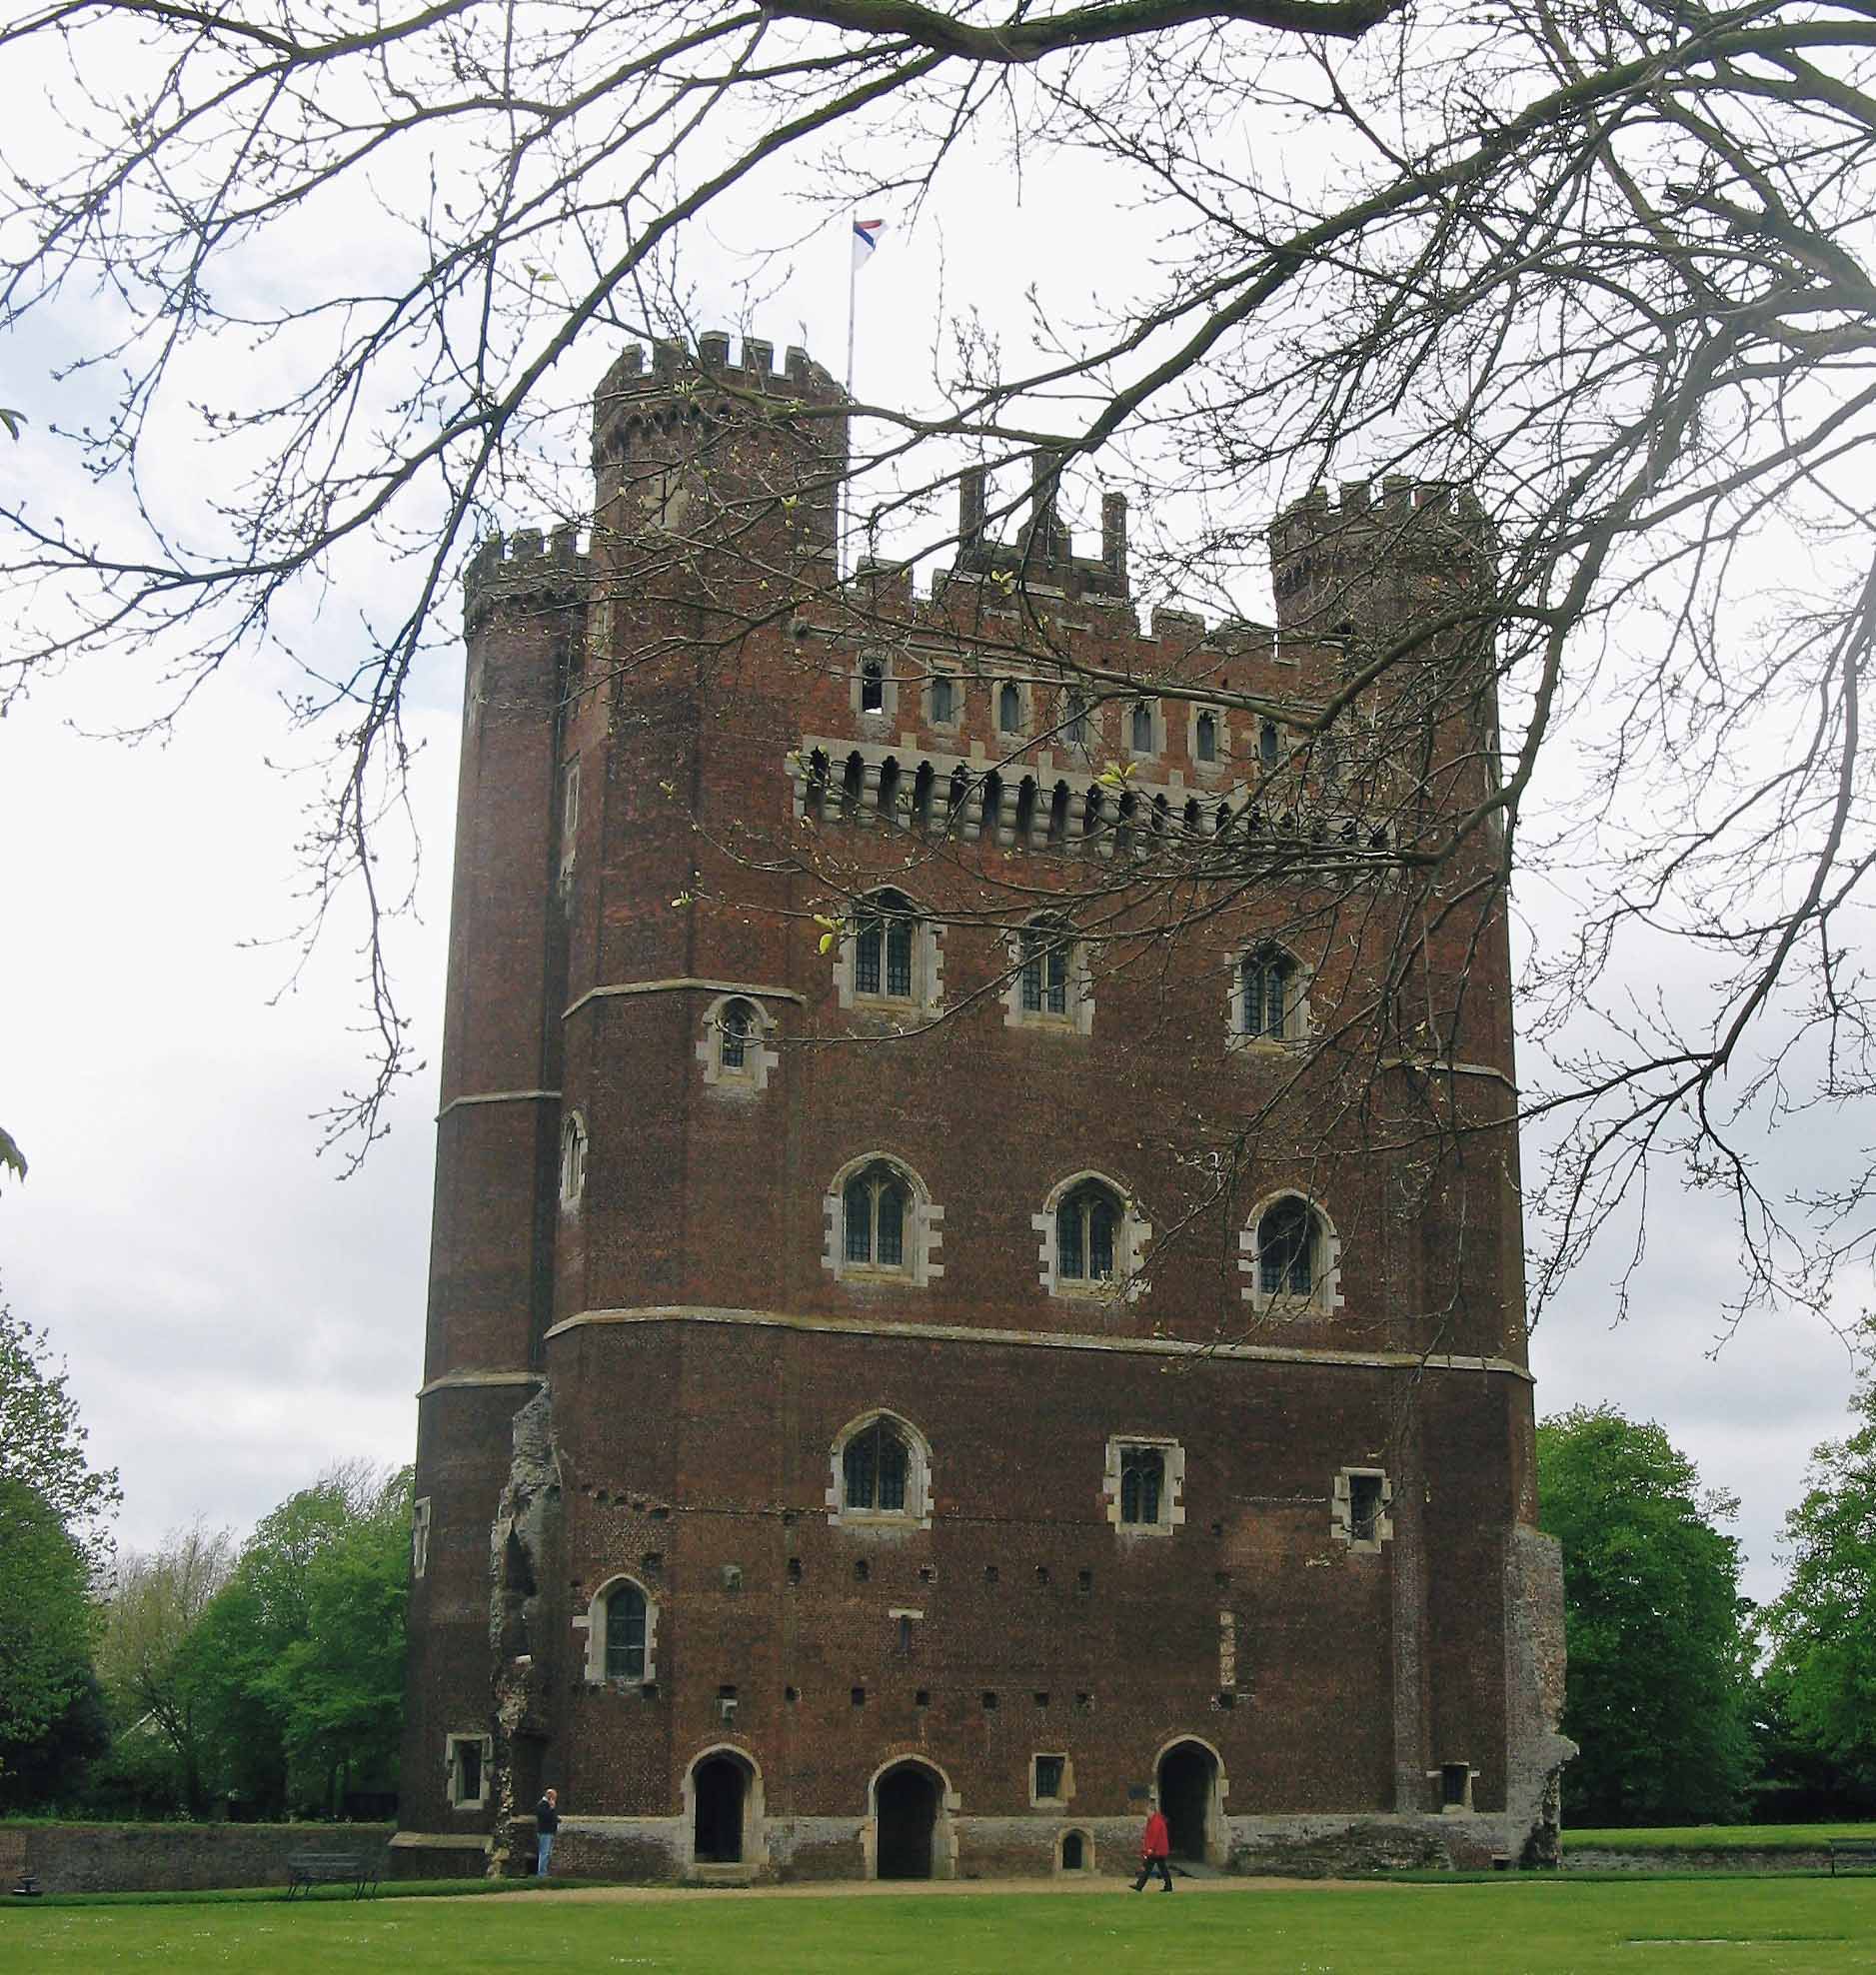 A photo of a tall, turreted castle, surrounded by grass and trees. It built out of red bricks, with pale stone details round the windows and doors.  